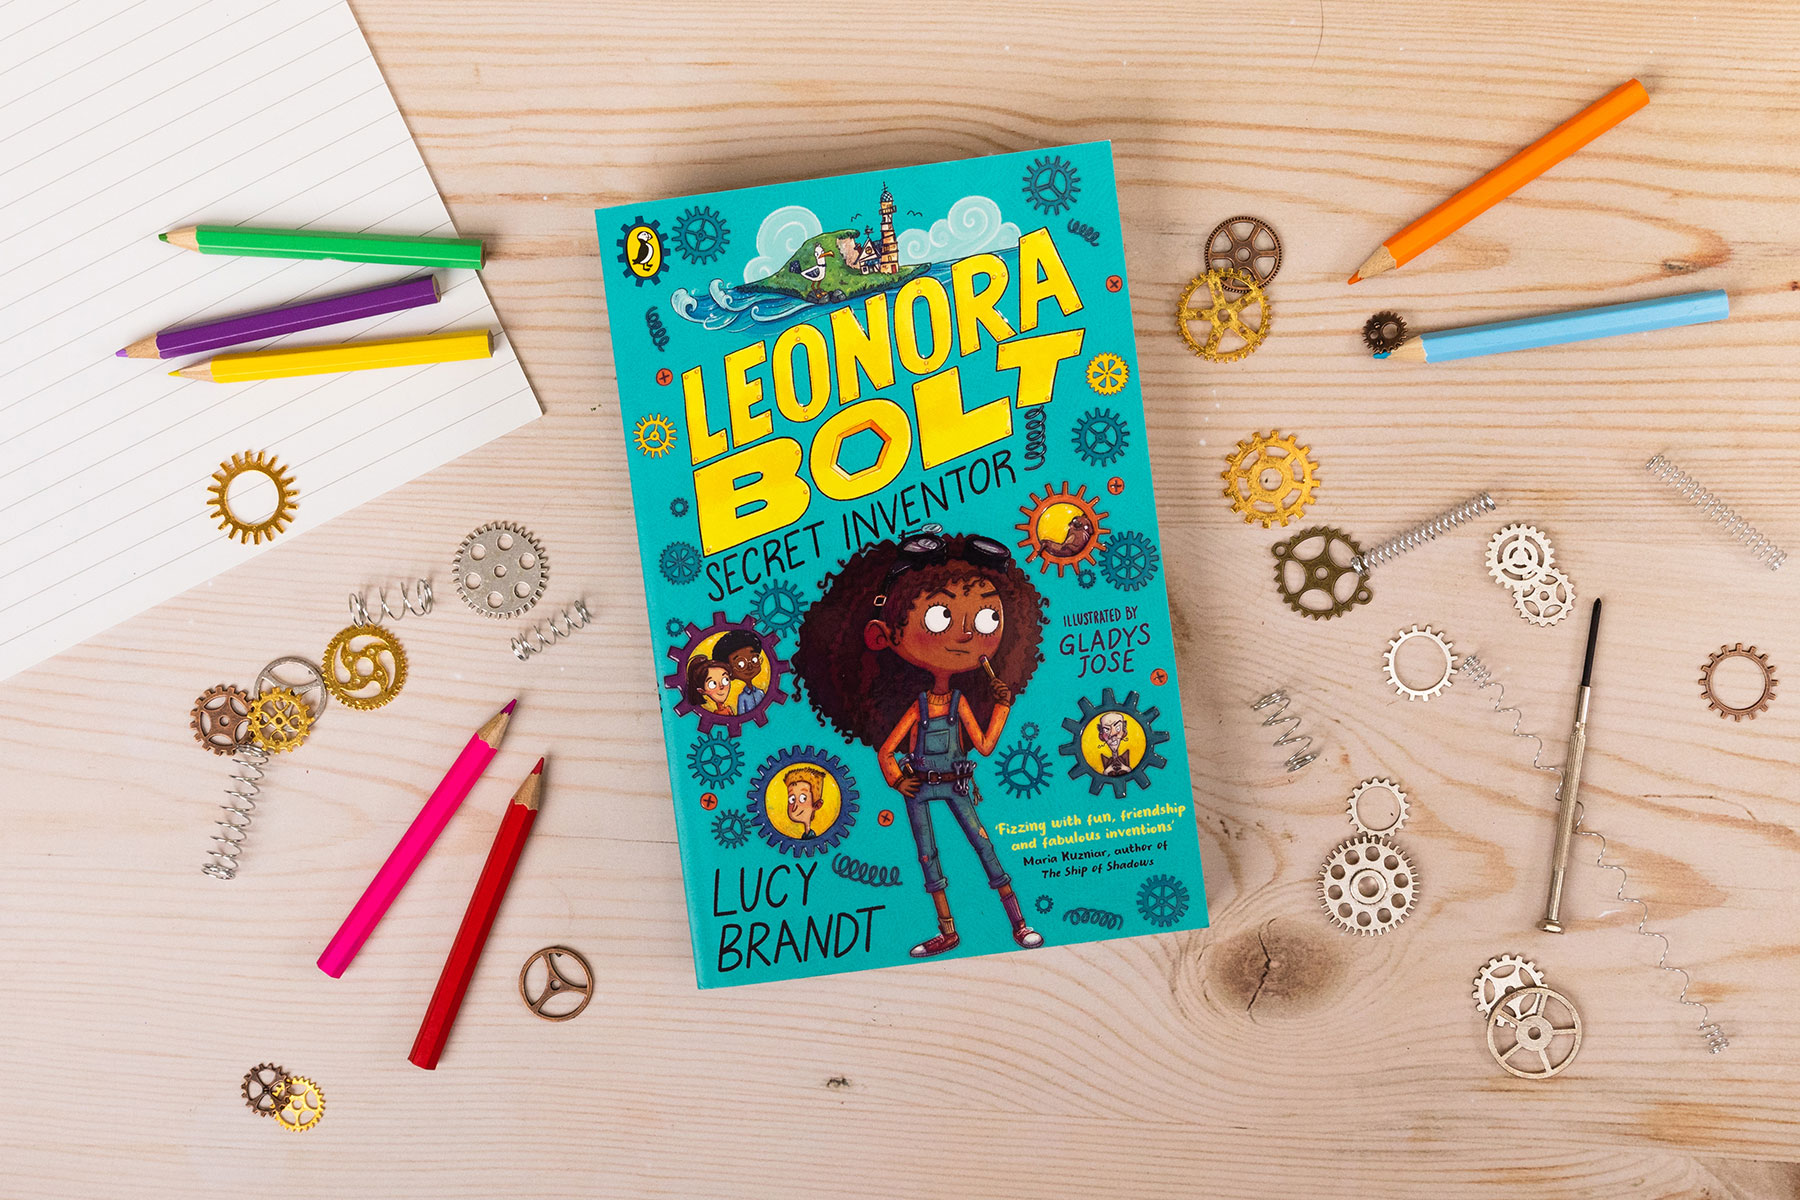 A photo of the book Leonora Bolt: Secret Inventor on a wooden table surrounded by colouring pencils, lined paper, screws and cogs